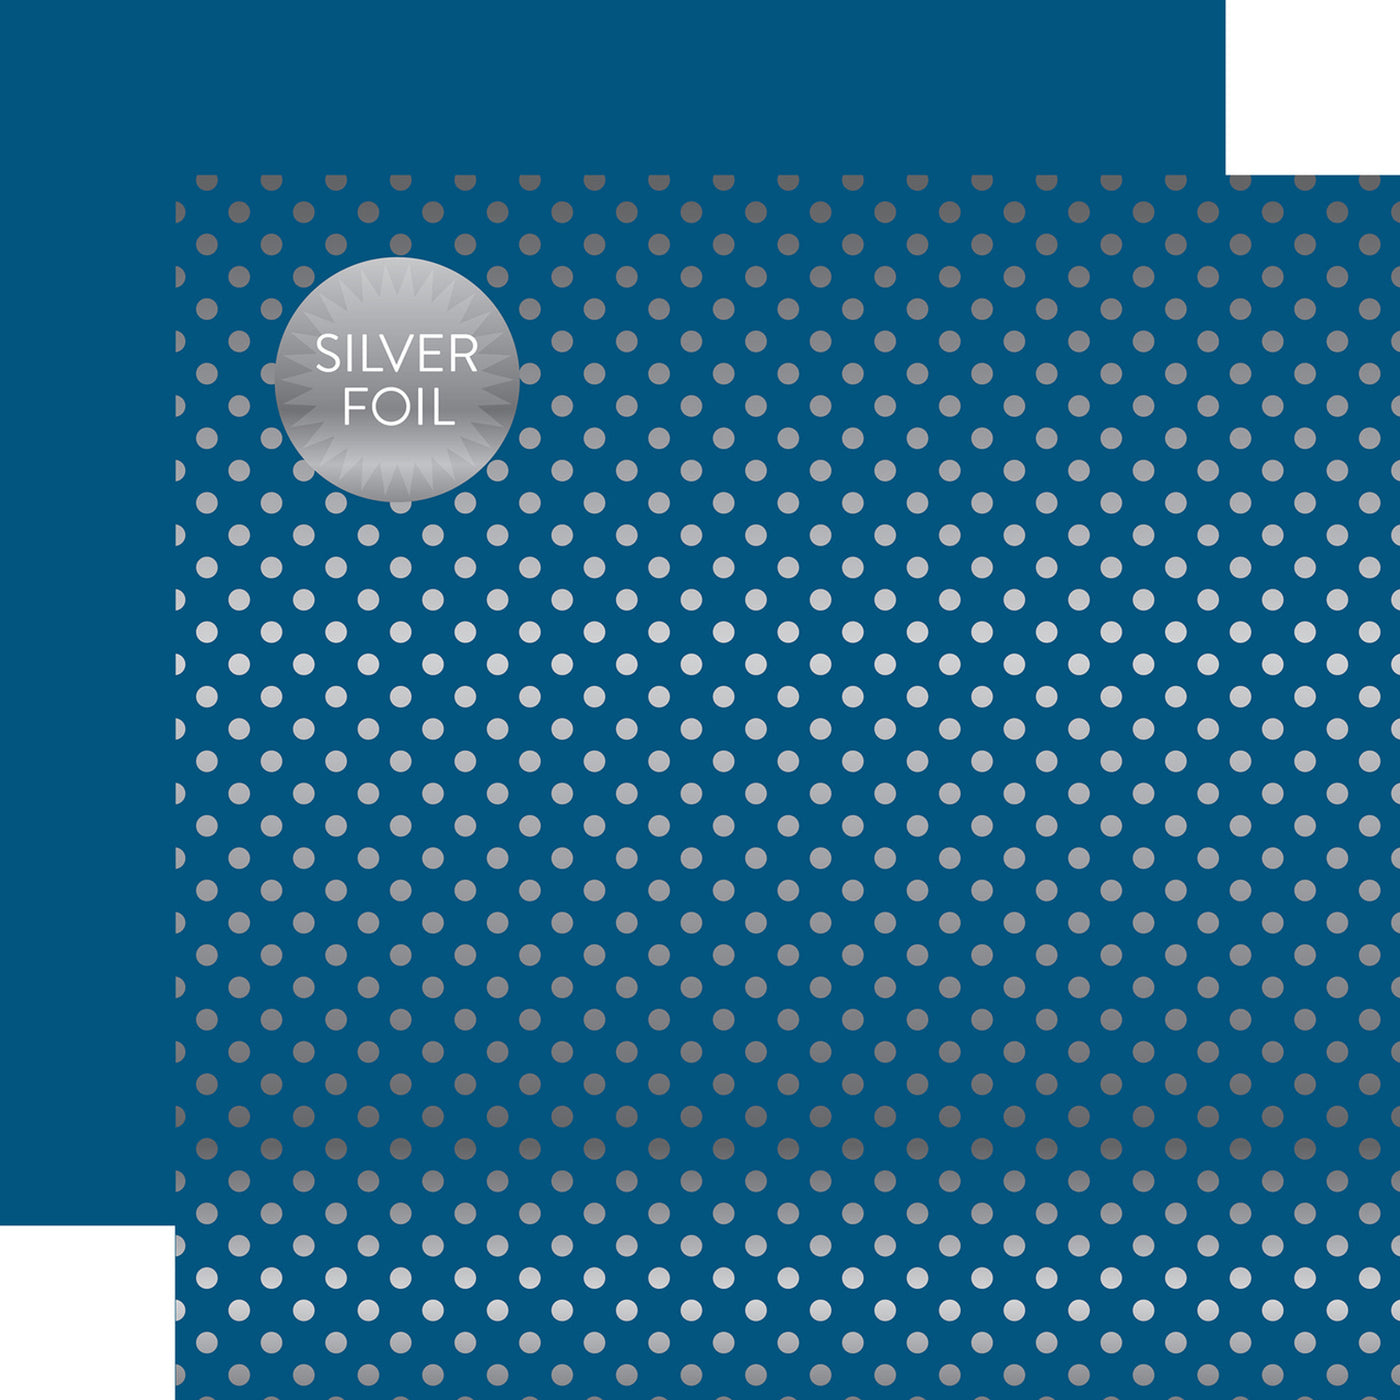 Silver foil dots on blue 12x12 cardstock, plain blue reverse, from Dots & Stripes Collection by Echo Park Paper.